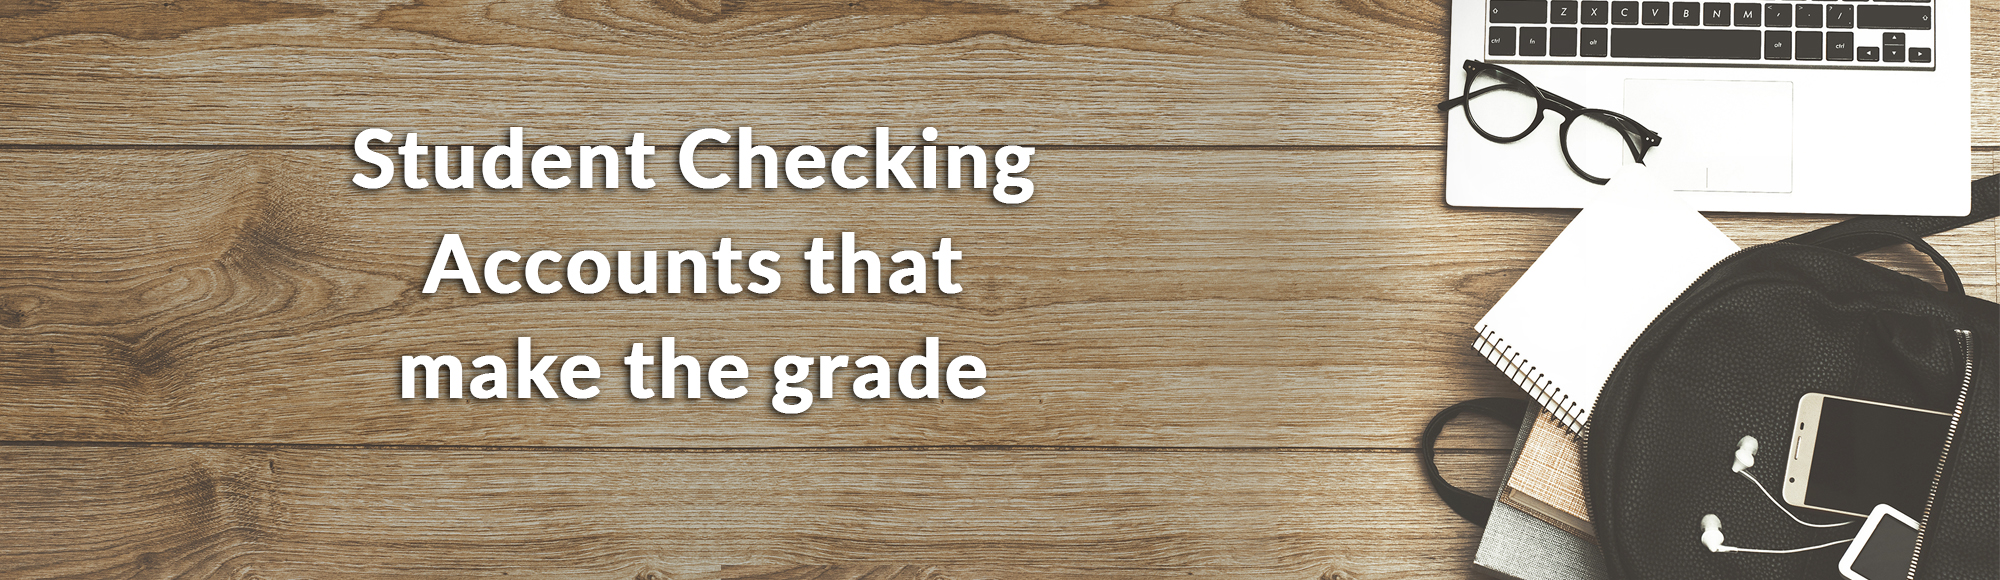 Student Checking Accounts that make the grade - Laptop, backpack, books, notebook, phone, headphones and glasses on wooden background. Top view